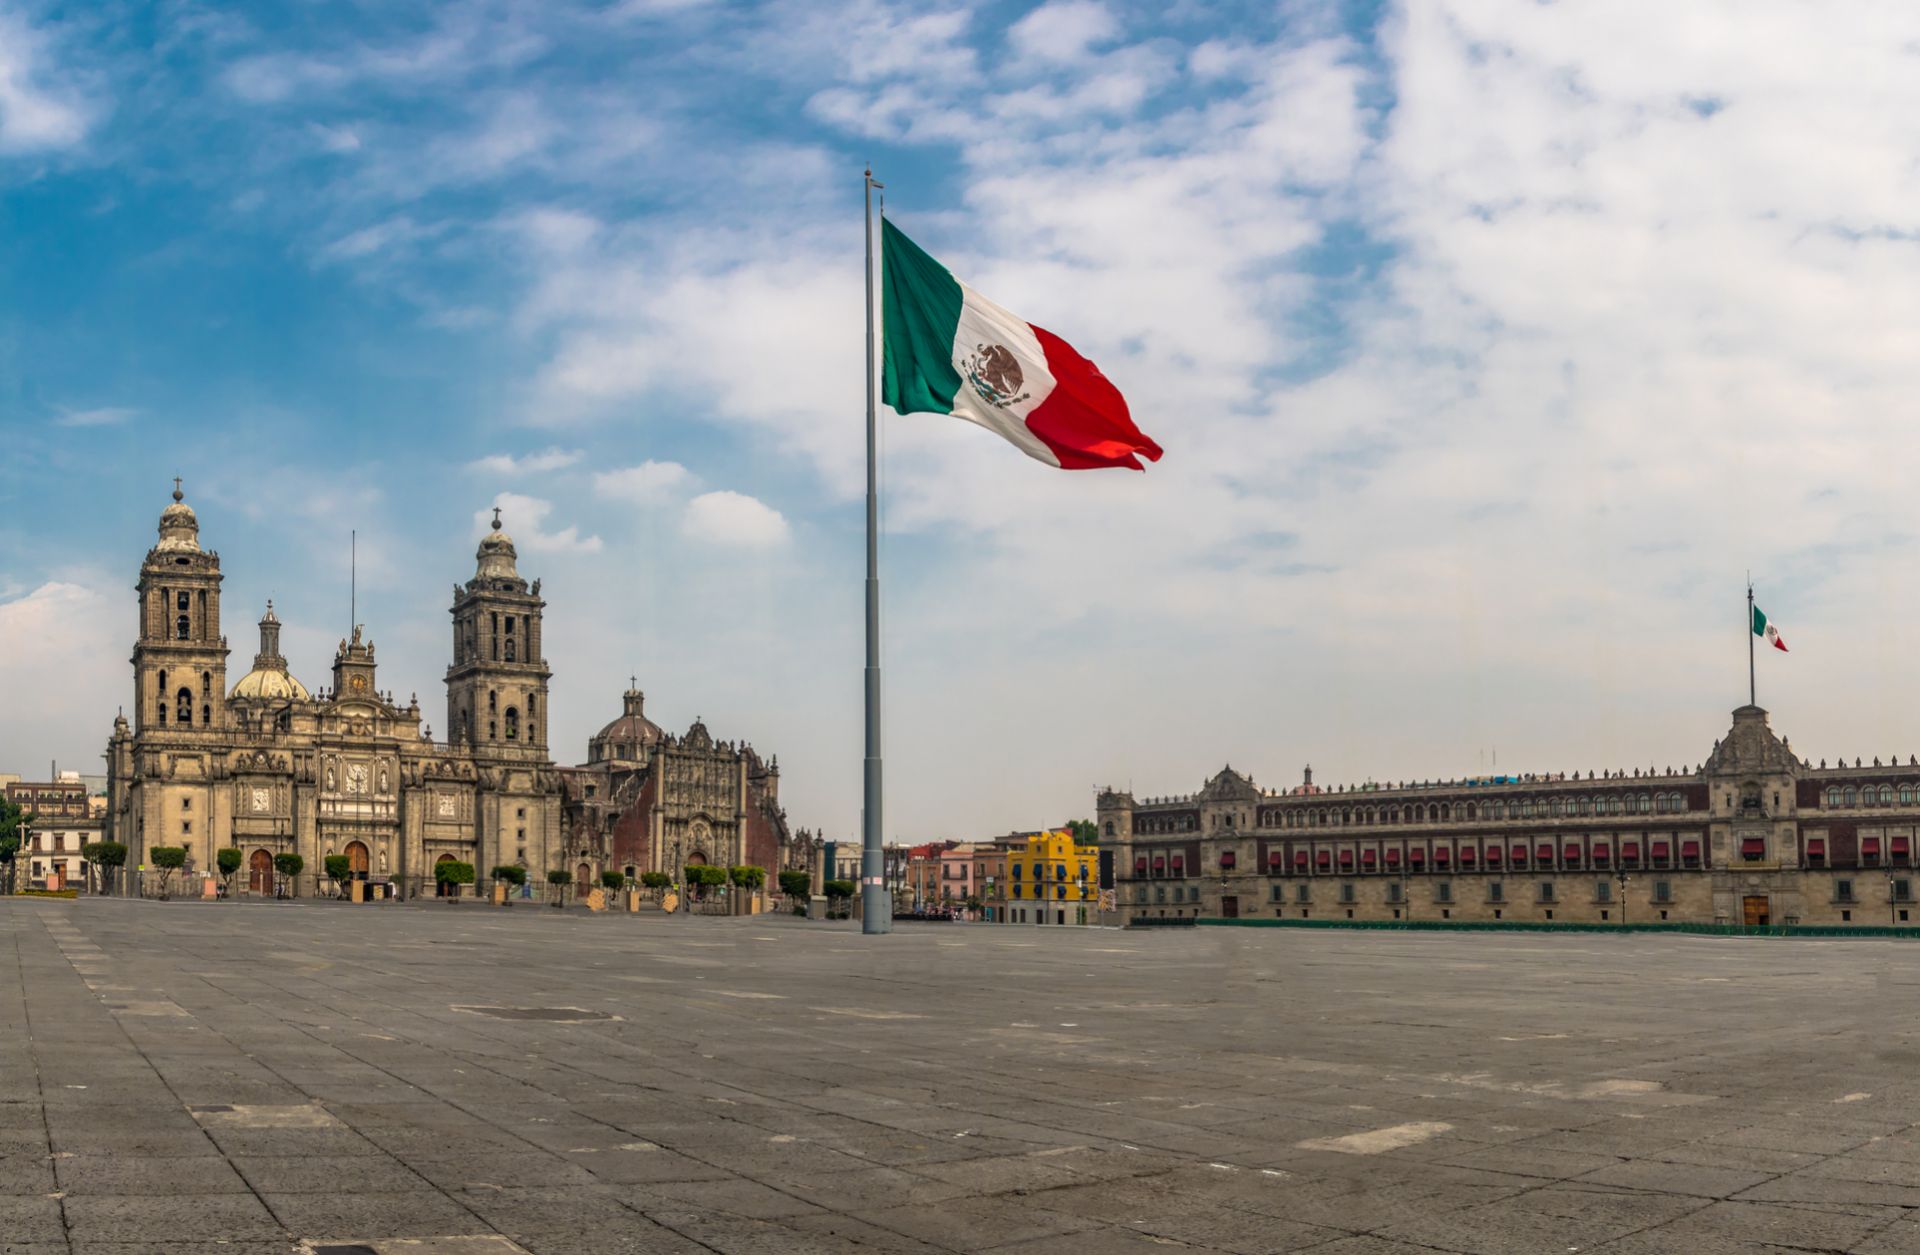 Mexico's flag flies in the country's capital, Mexico City.